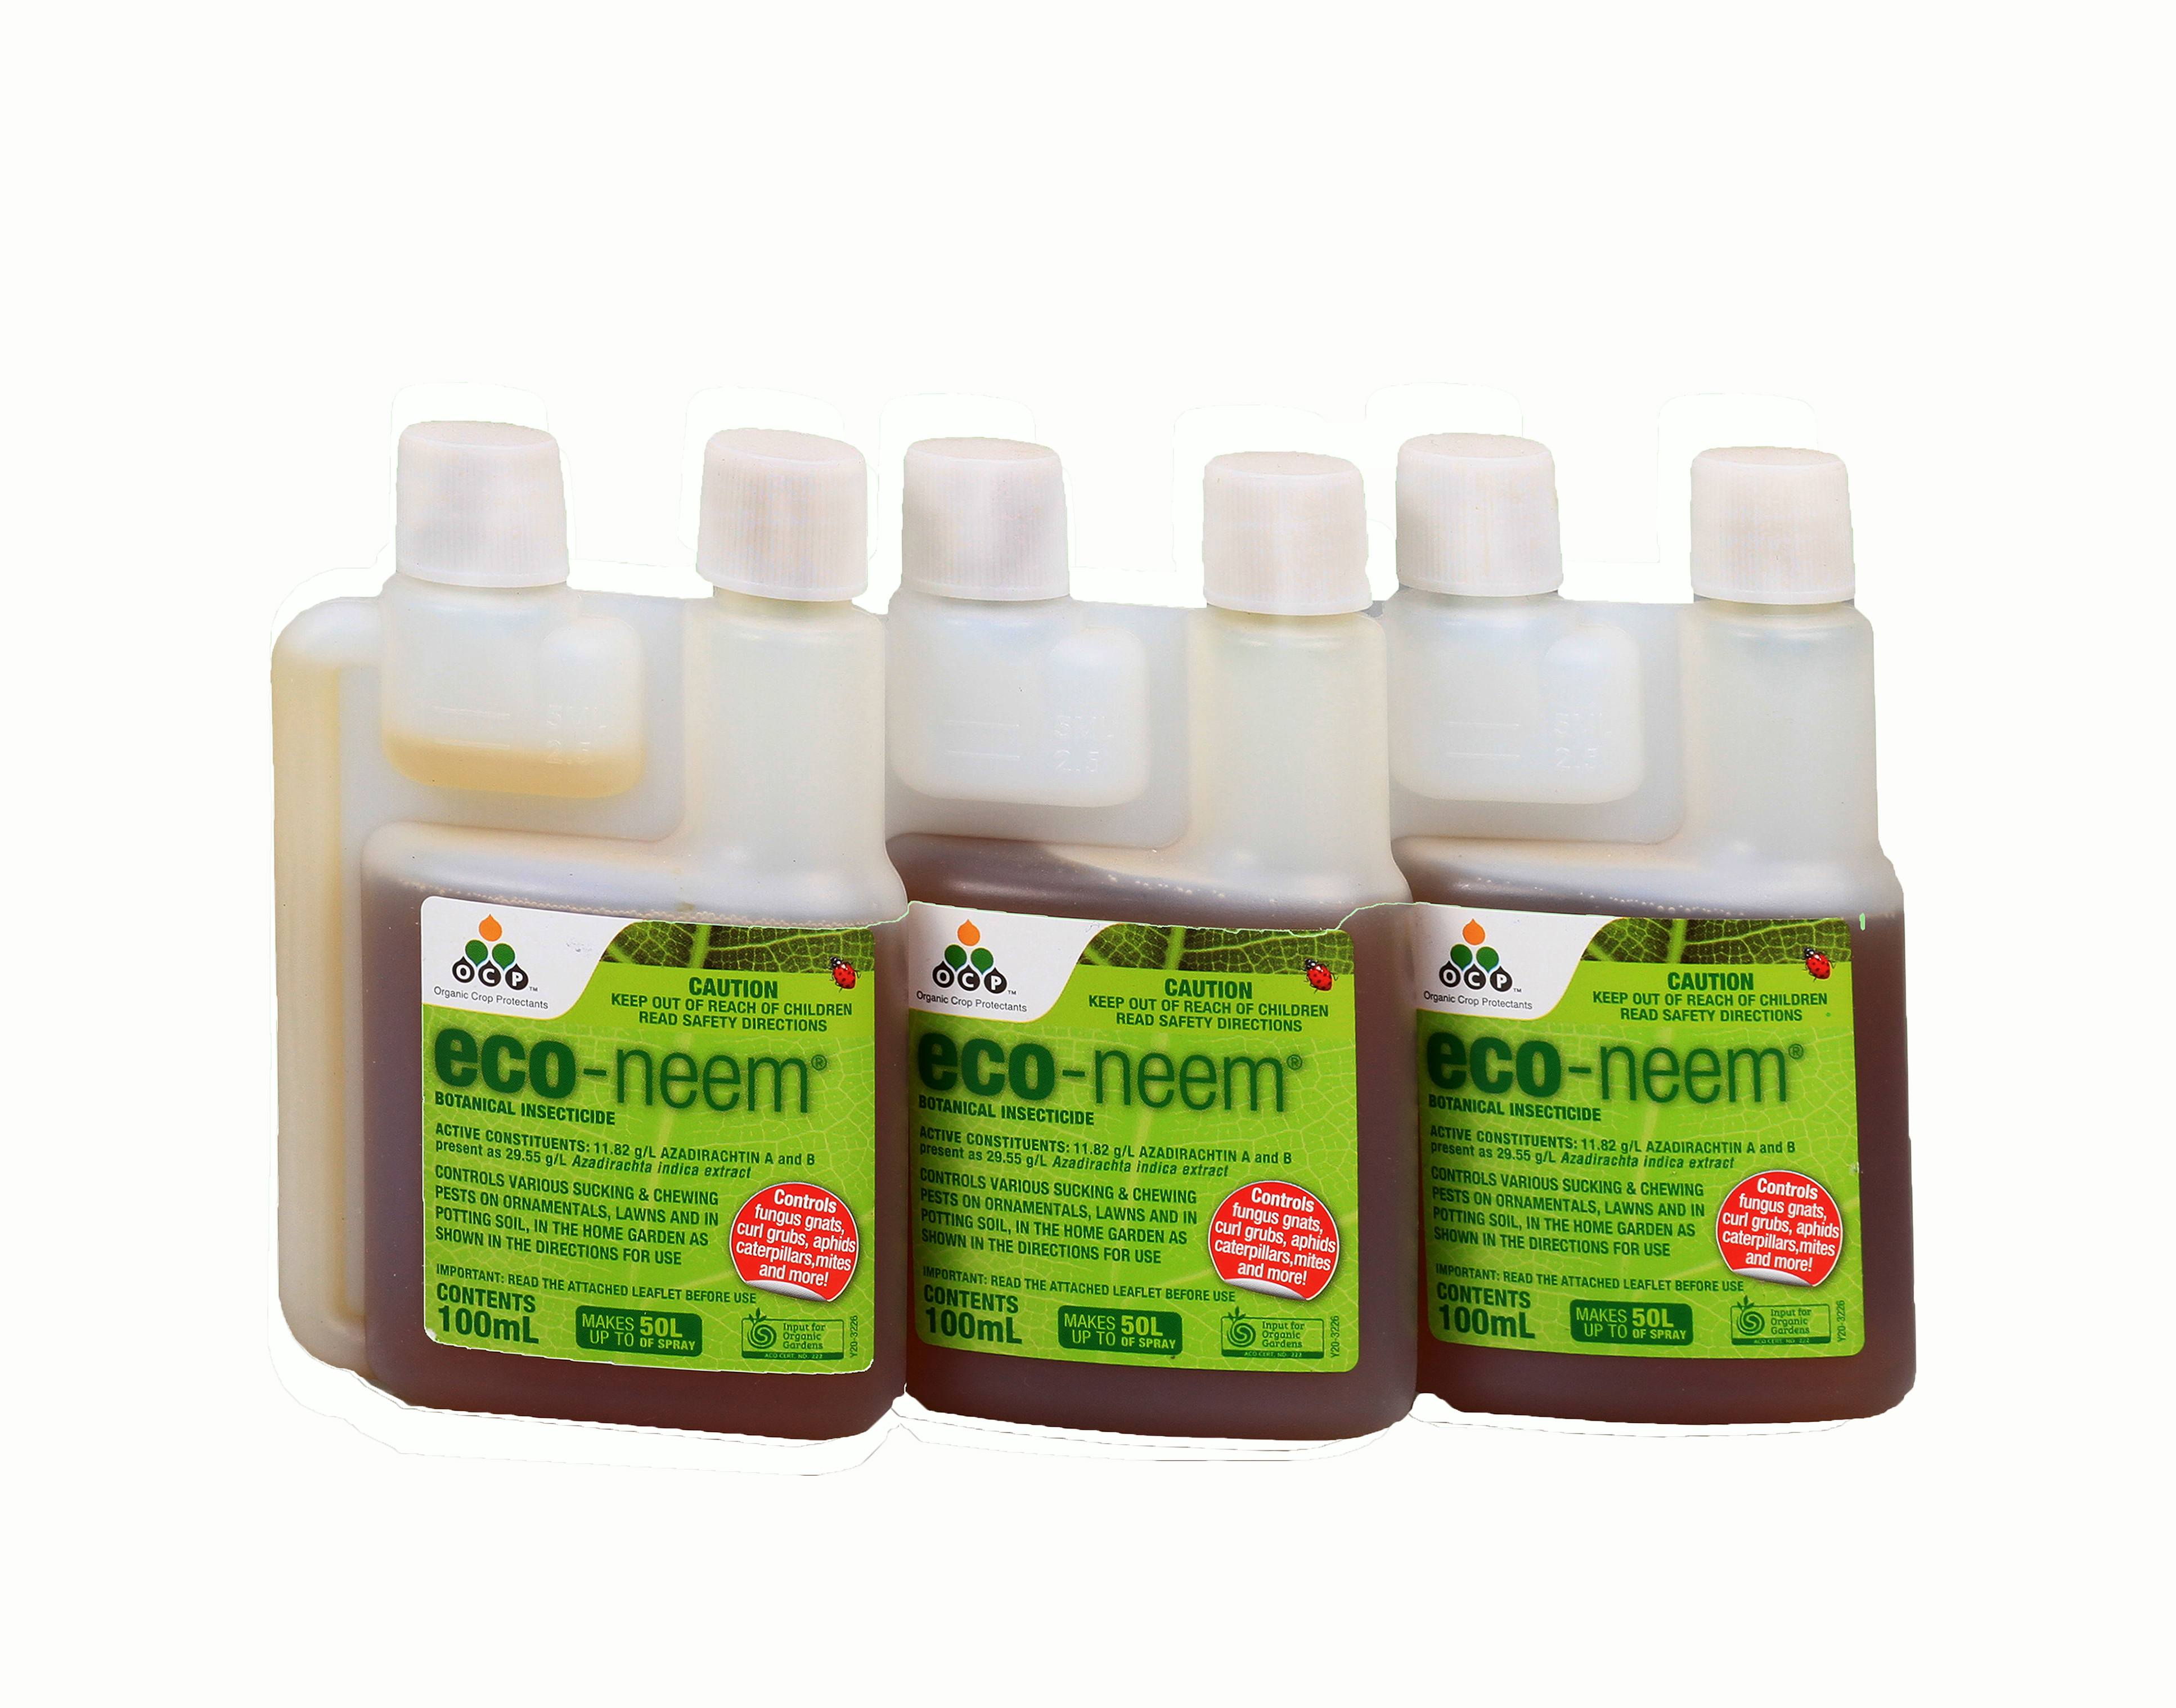 Eco-neem insecticide